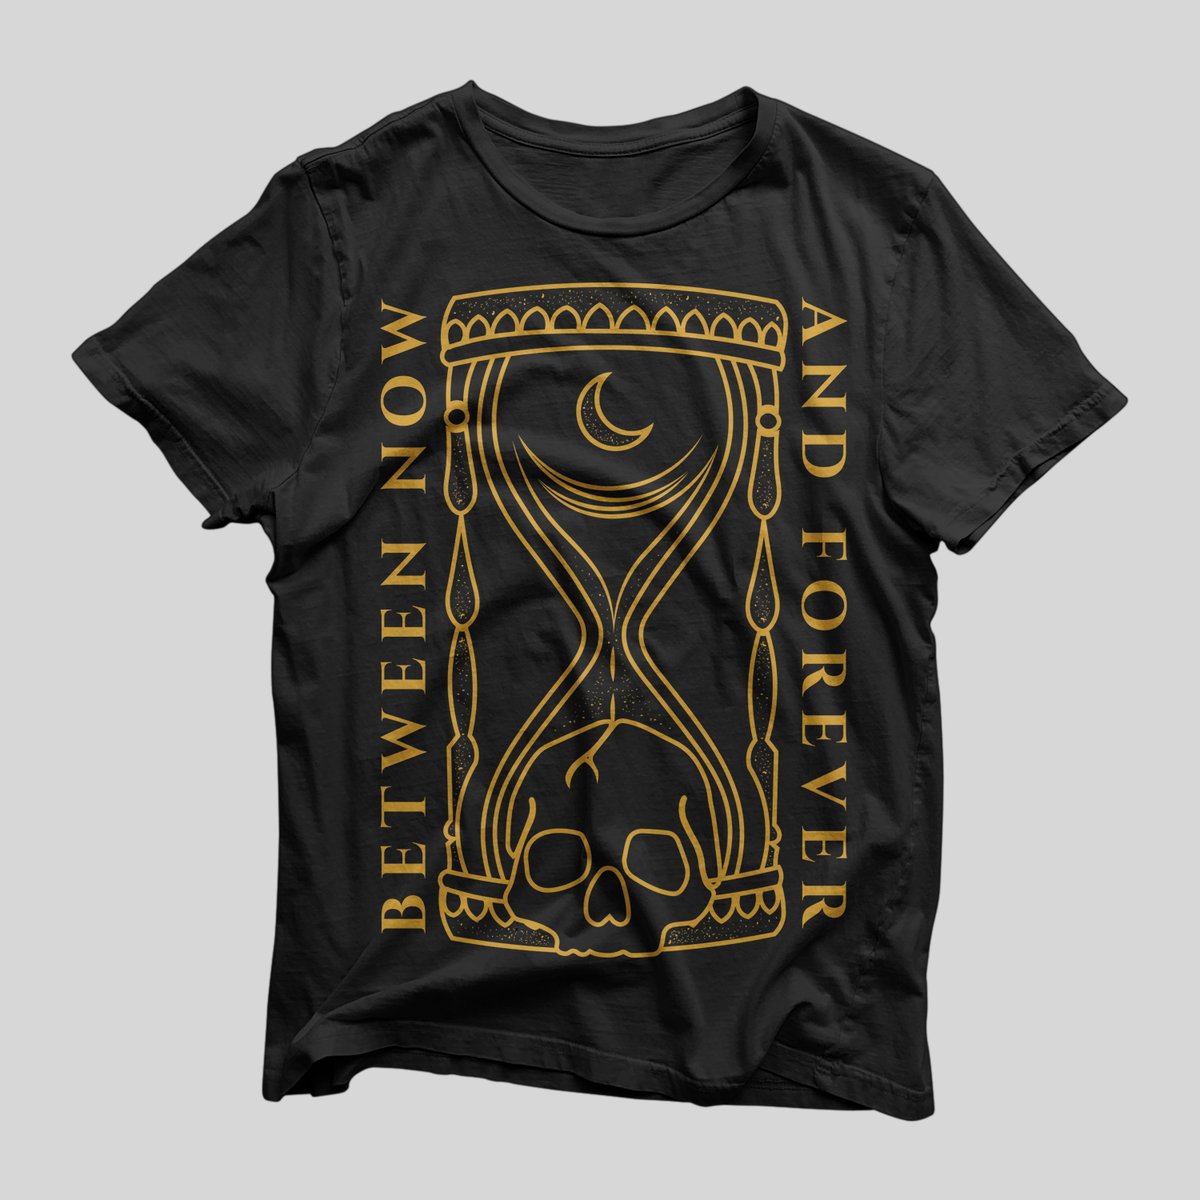 Image of Hourglass Tee - Black and Gold